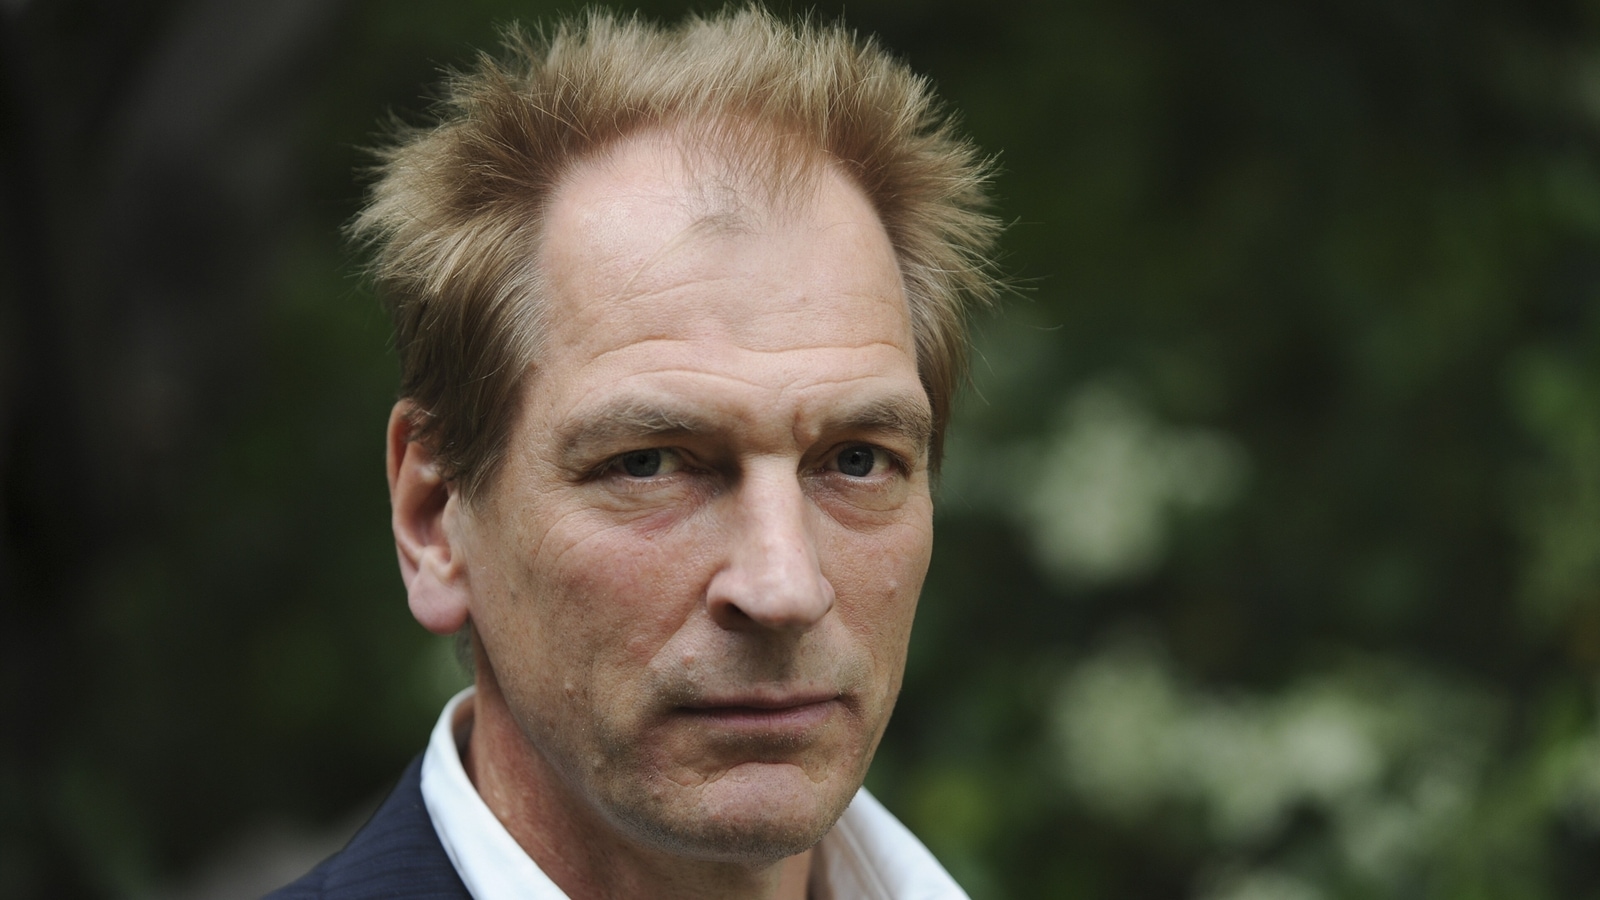 Actor Julian Sands missing for 5 days. He was hiking in US mountain range